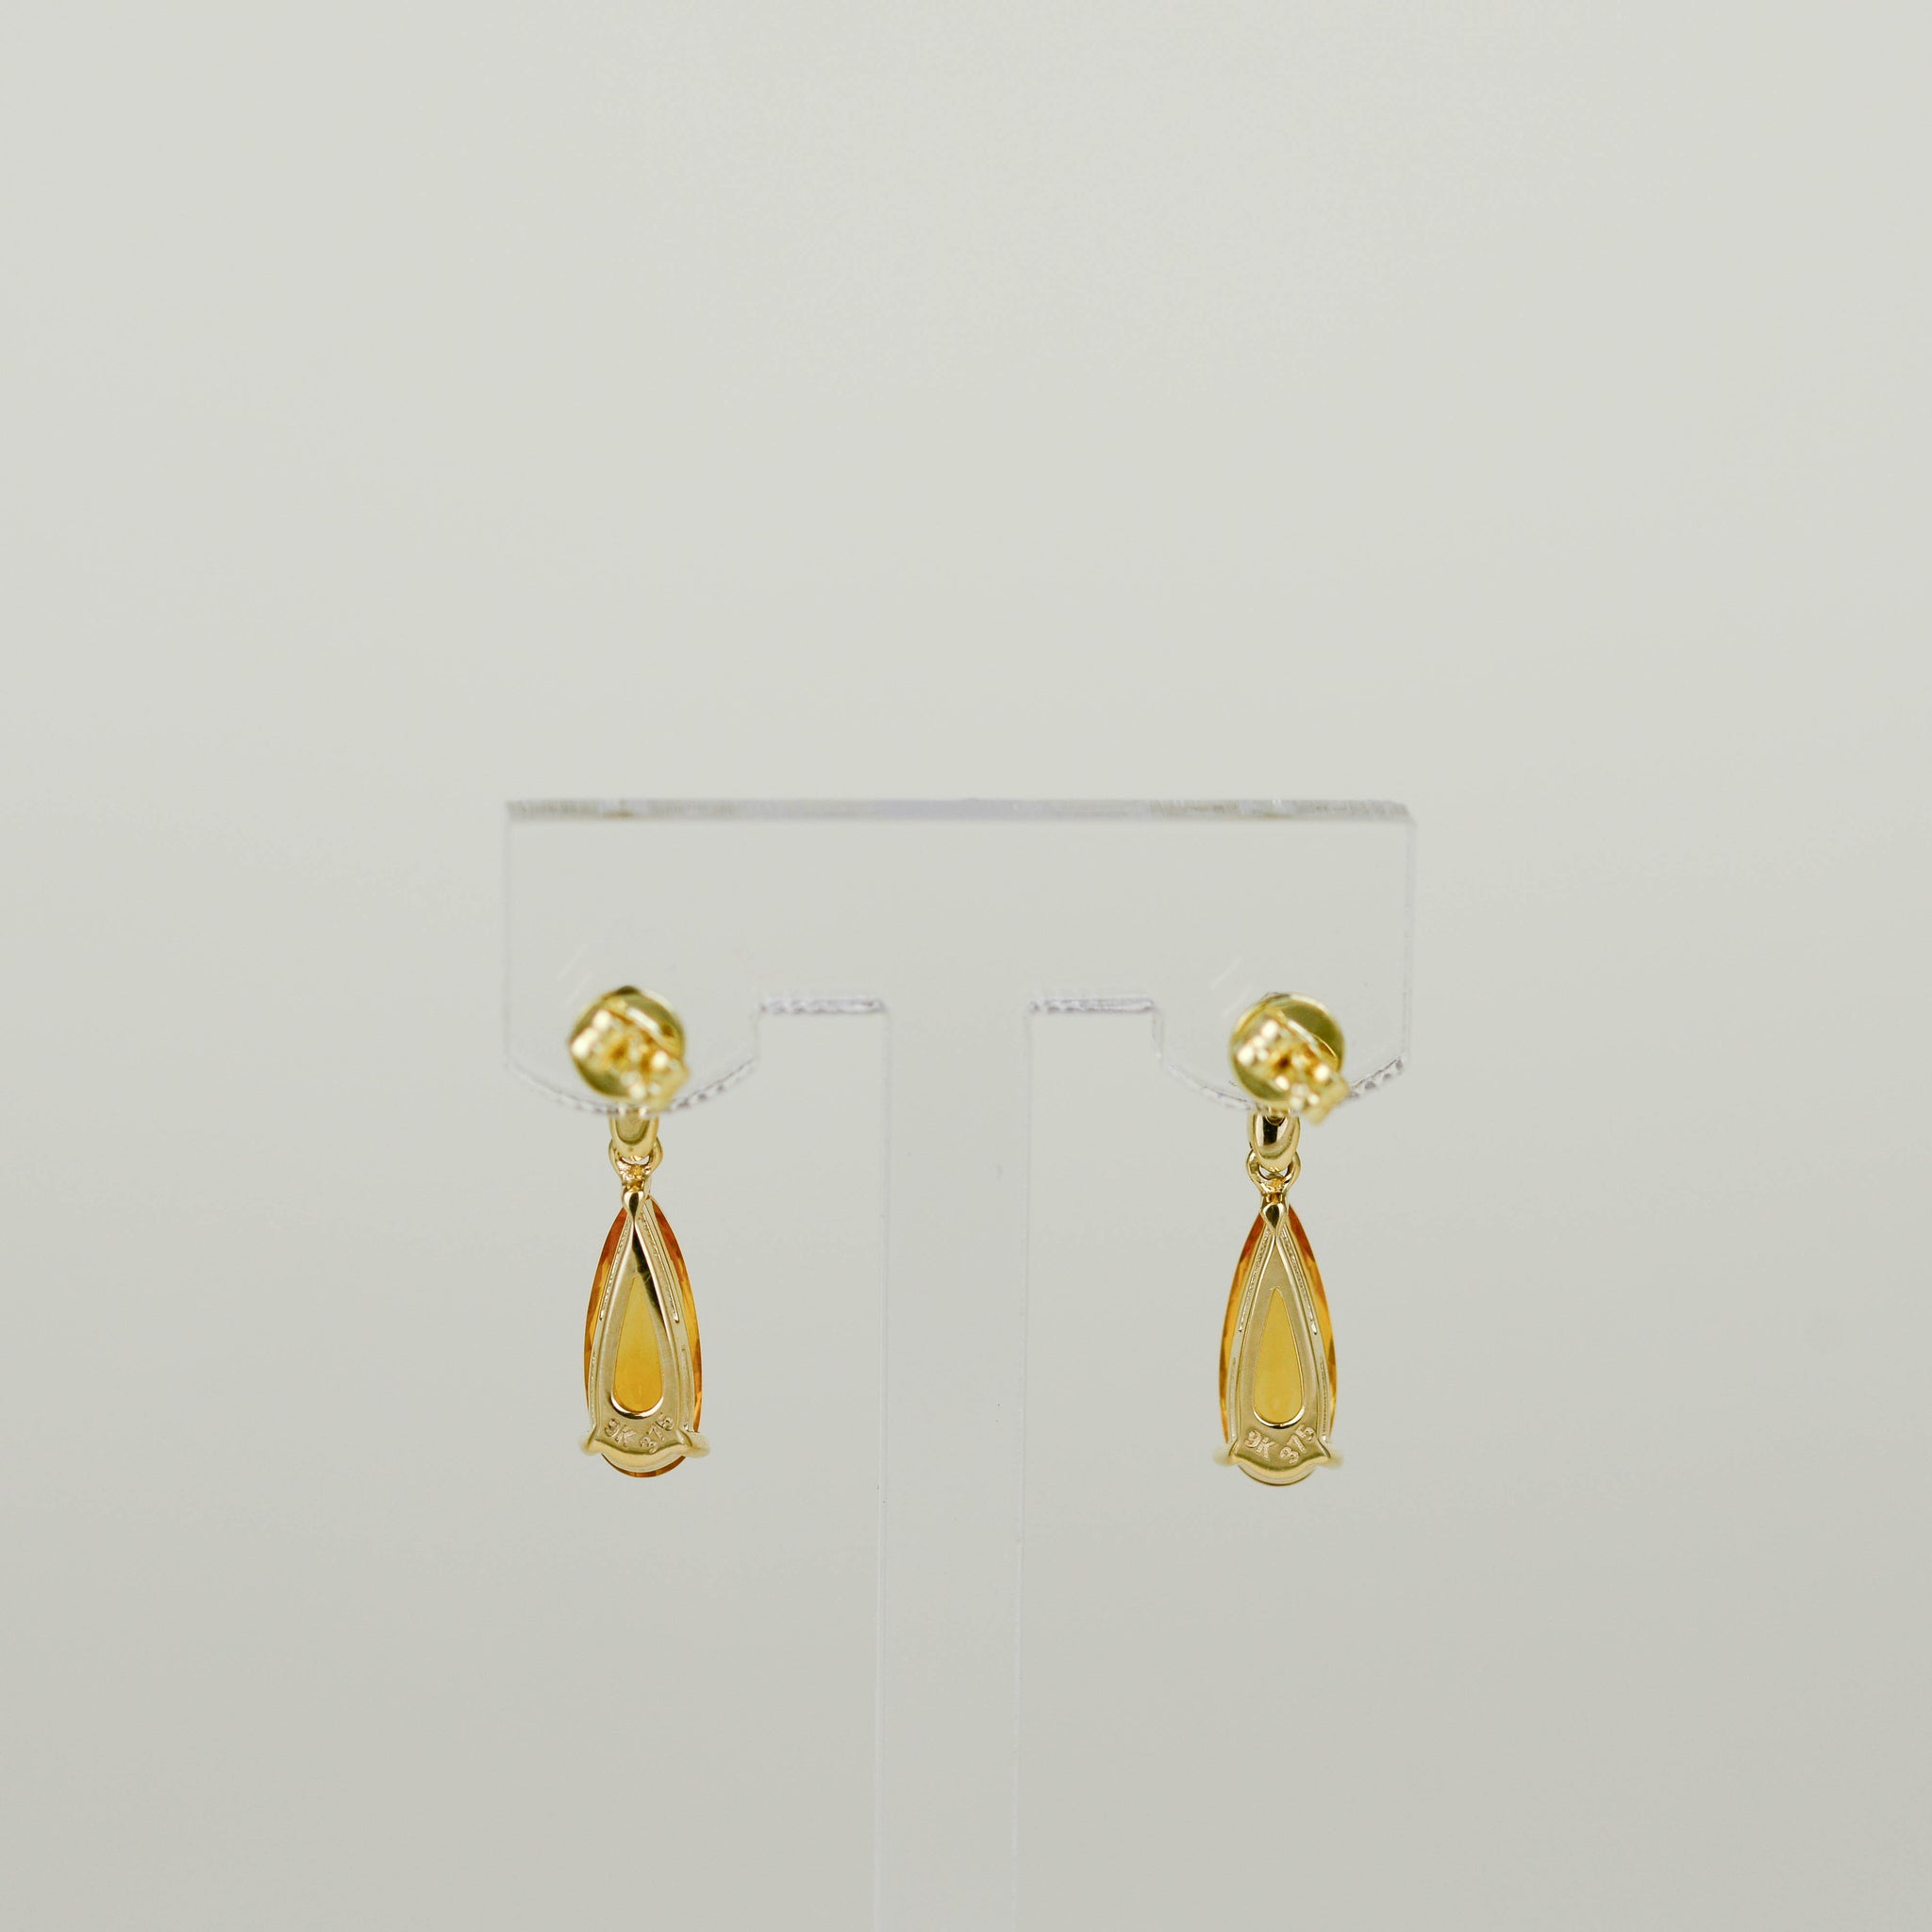 9ct Yellow Gold 2.22ct Elongated Pear Cut Citrine and Diamond Drop Earrings